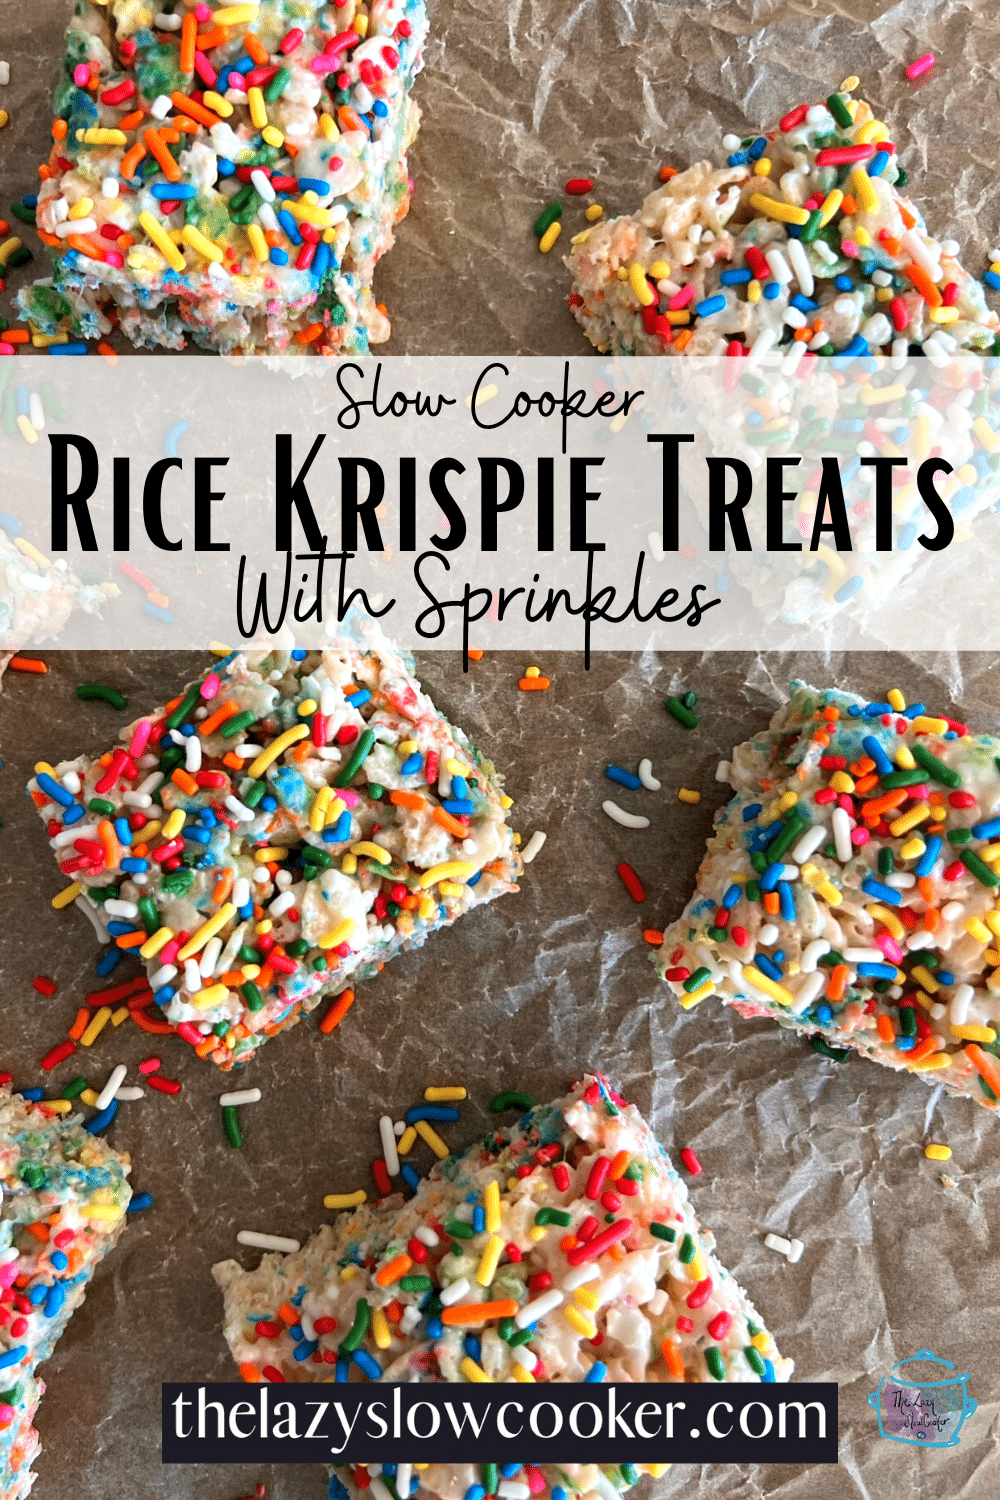 Slow Cooker Rice Krispie Treats With Sprinkles - The Lazy Slow Cooker